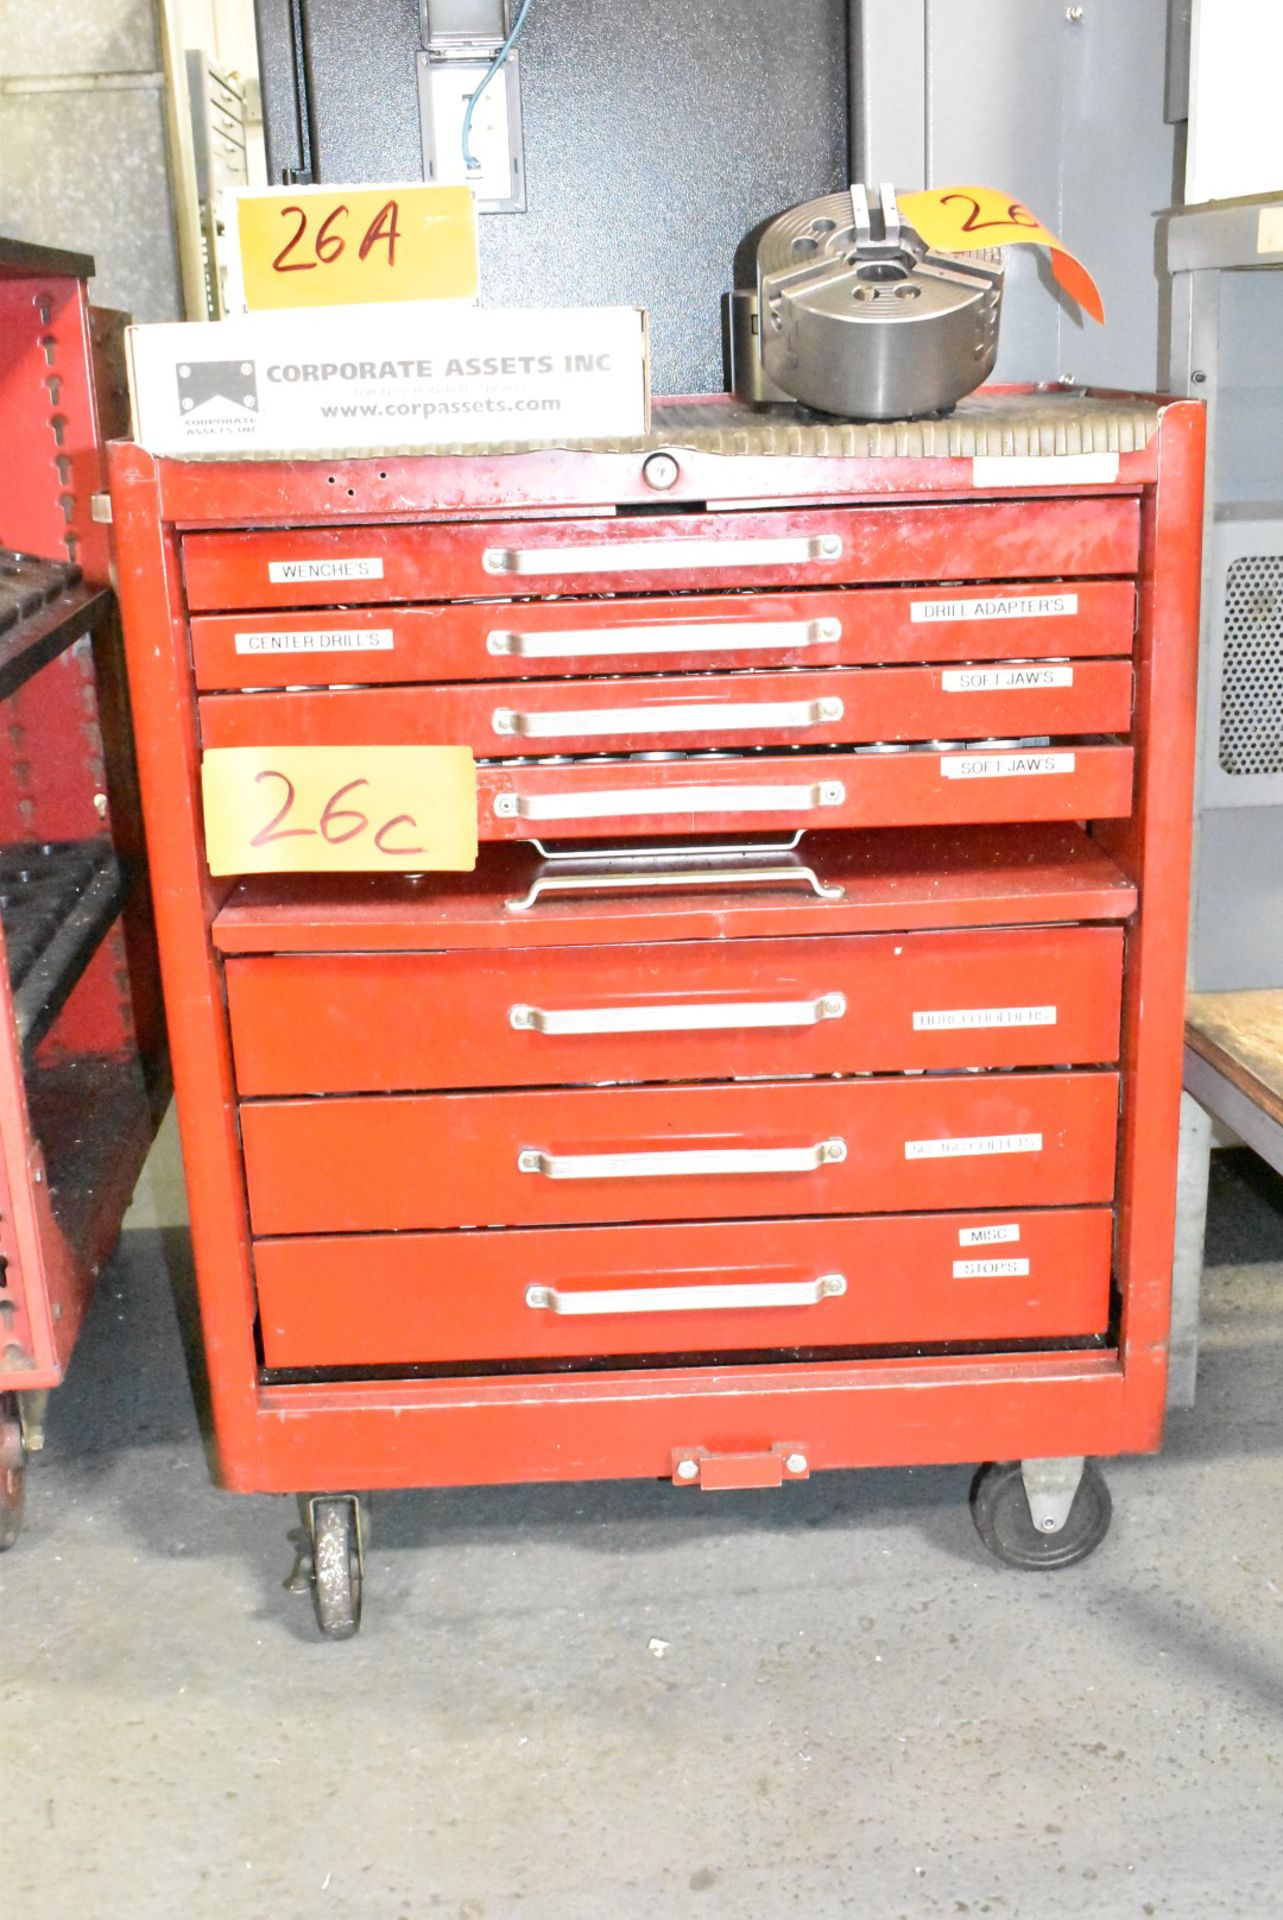 LOT/ ROLLING TOOLBOX WITH CHUCK JAWS, COLLETS, SLEEVES & HAND TOOLS